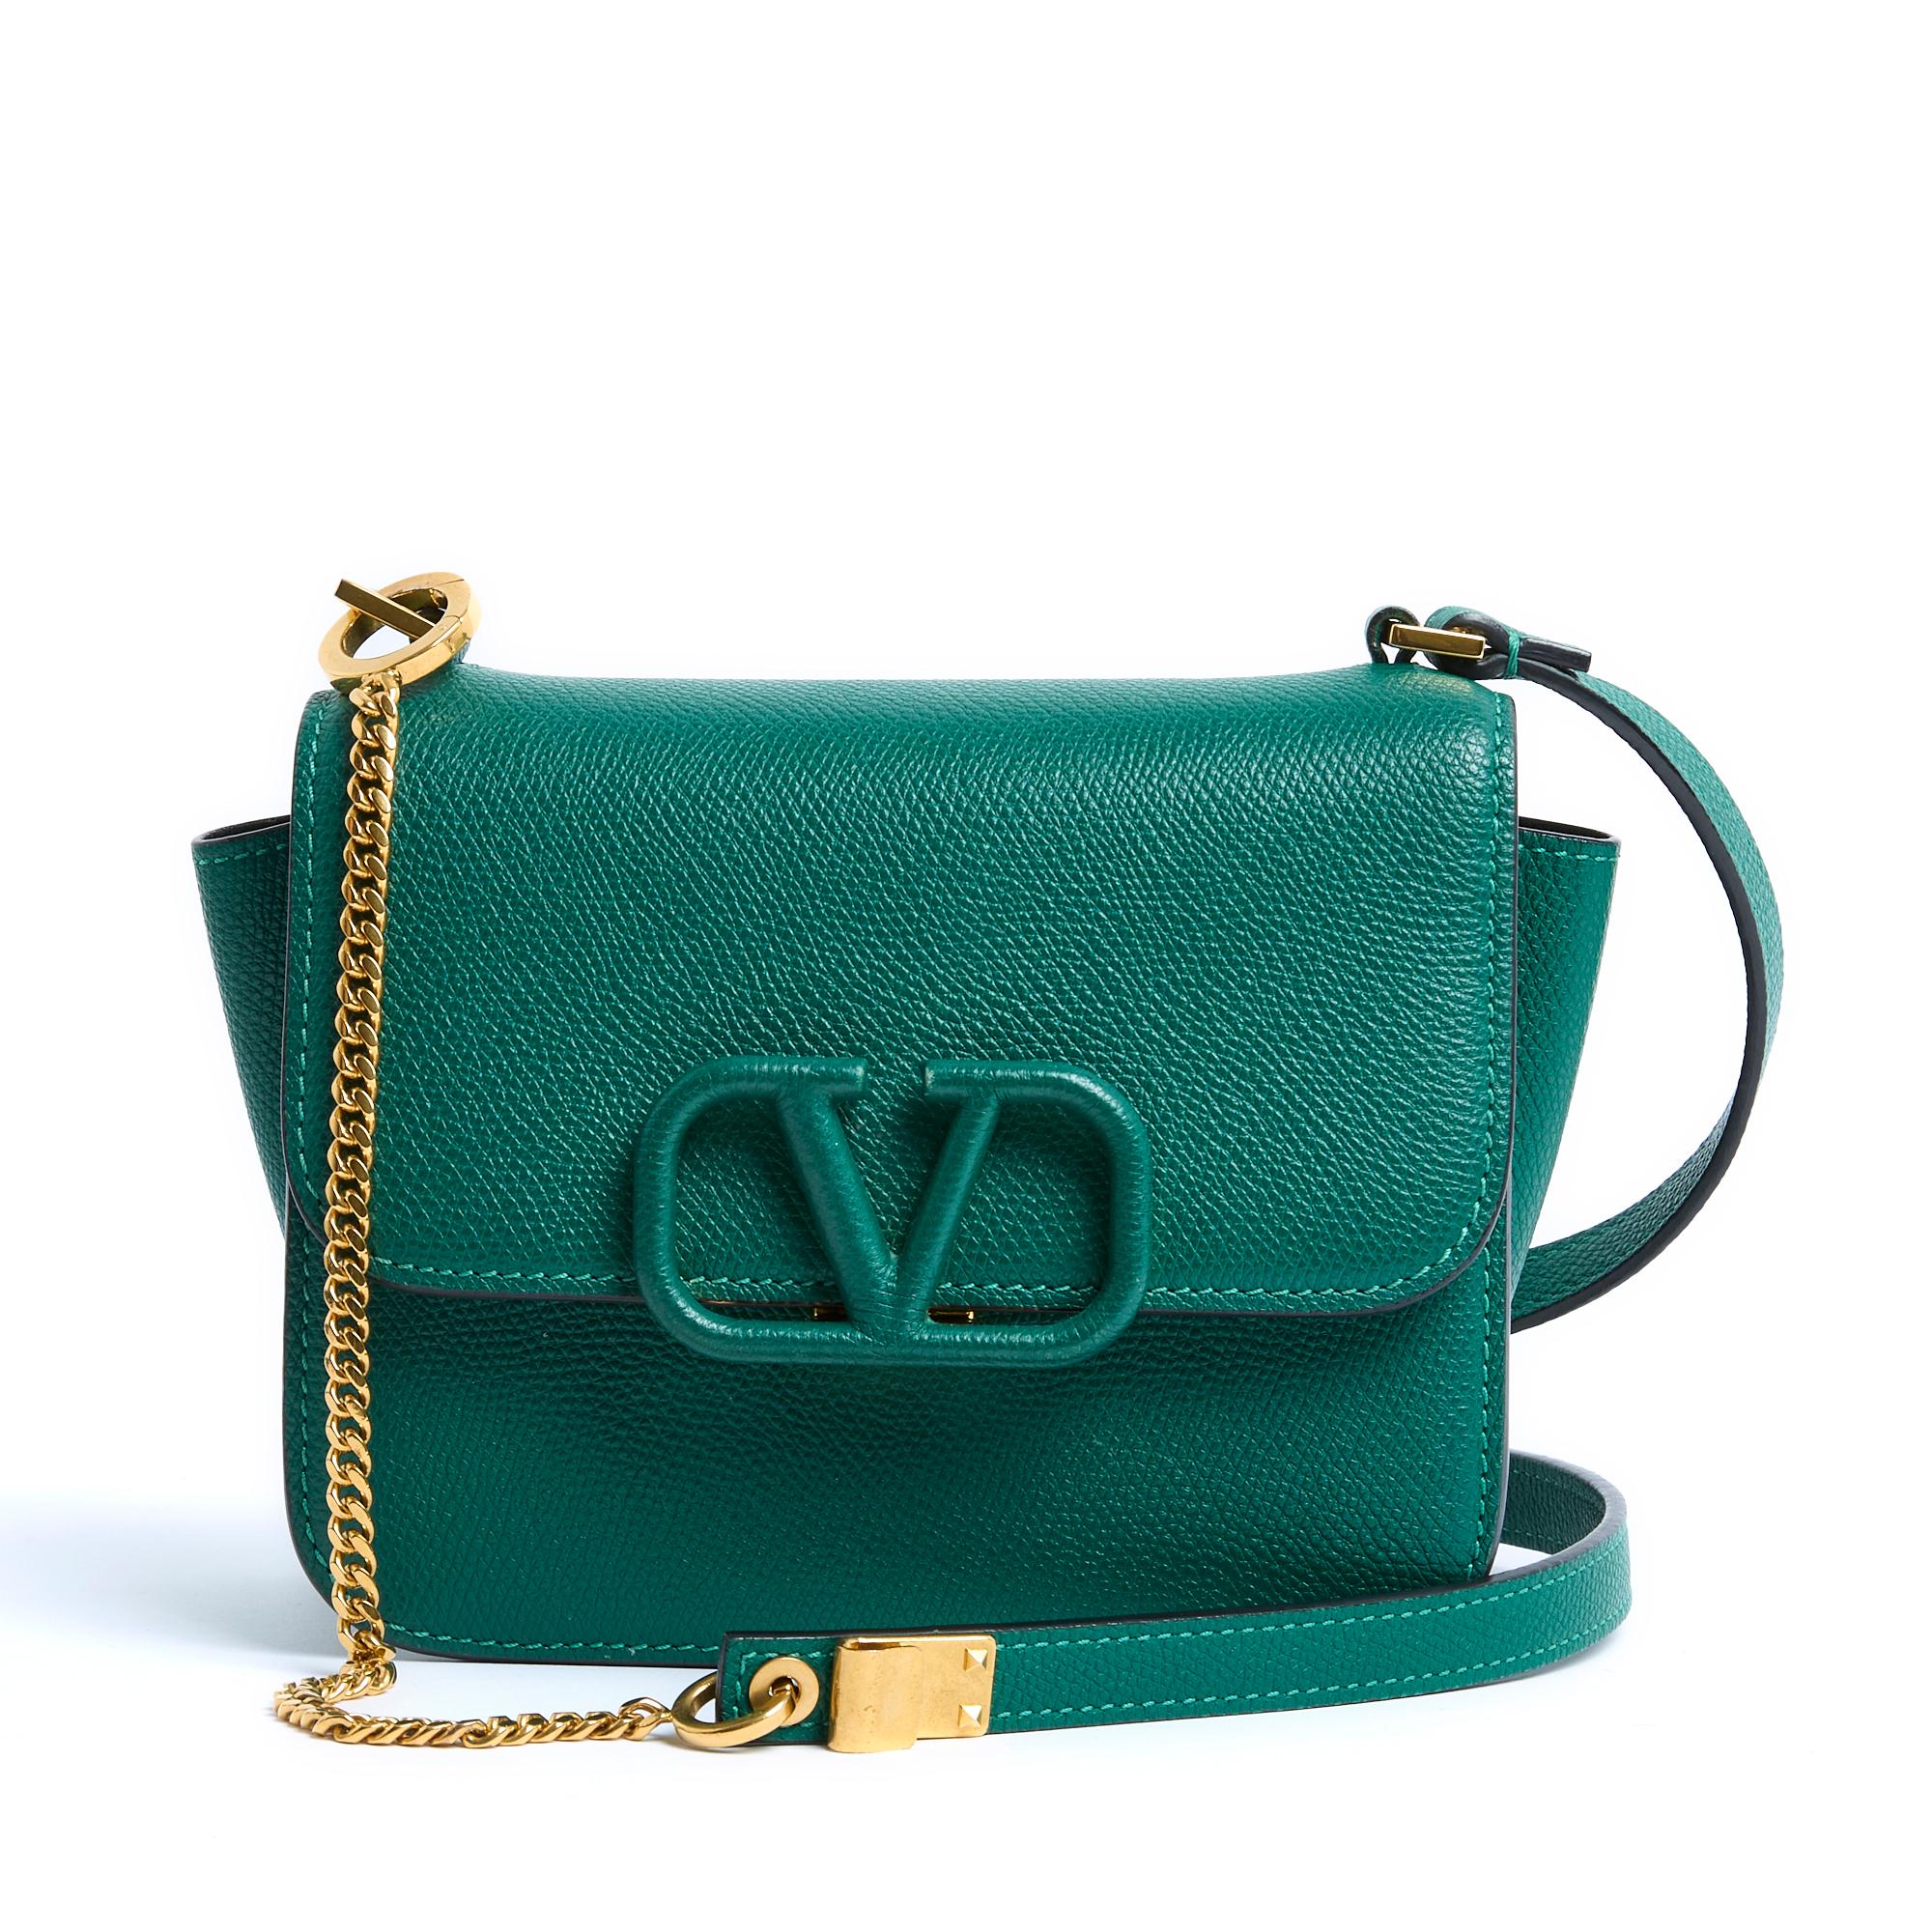 Valentino VLogo model bag in green grained leather, gold metal tilting clasp covered in leather, black leather interior with a small patch pocket in red leather with Valentino logo, long leather shoulder strap and gold metal chain for shoulder wear